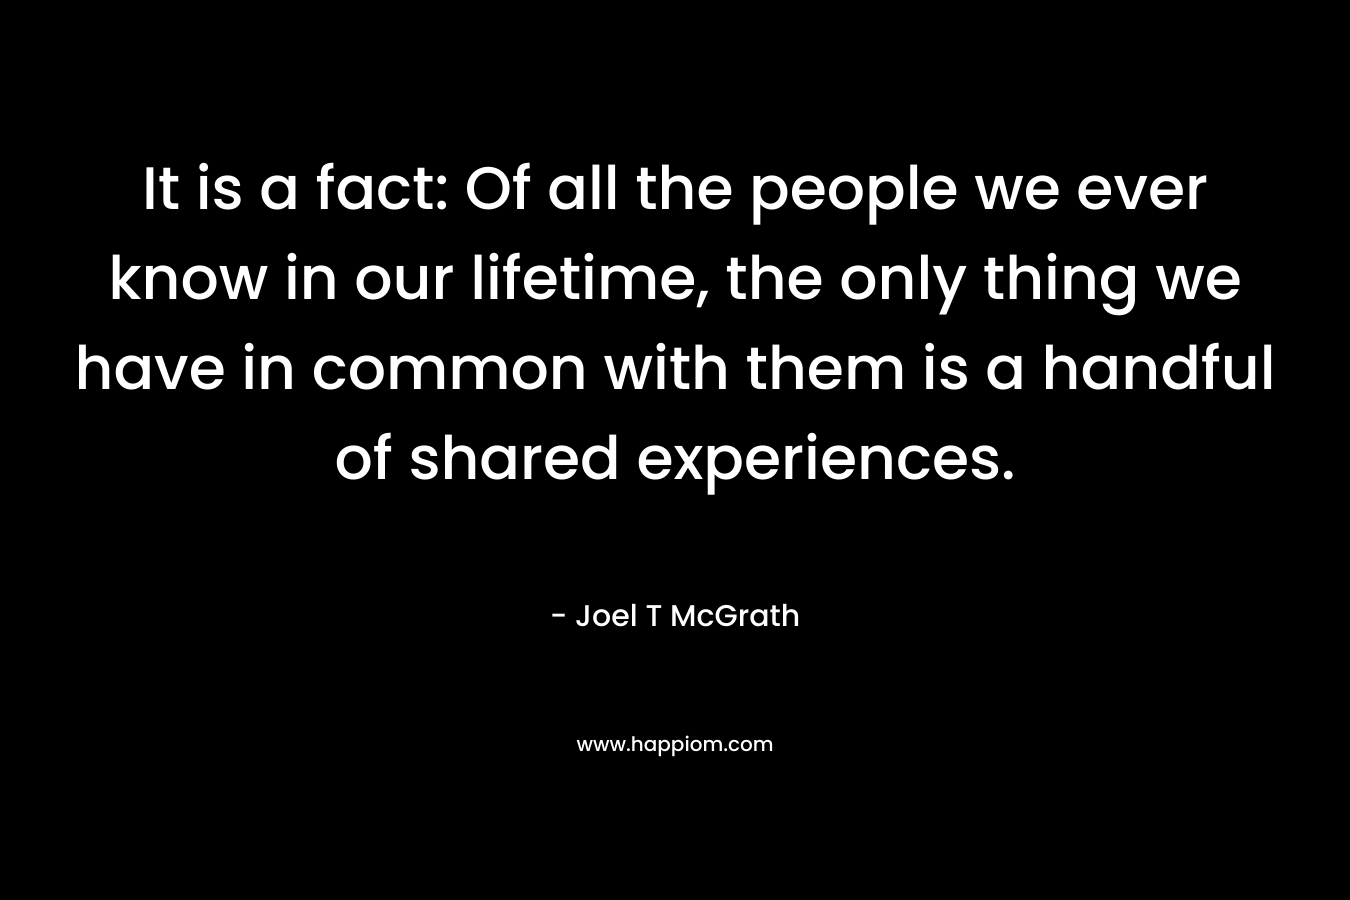 It is a fact: Of all the people we ever know in our lifetime, the only thing we have in common with them is a handful of shared experiences.